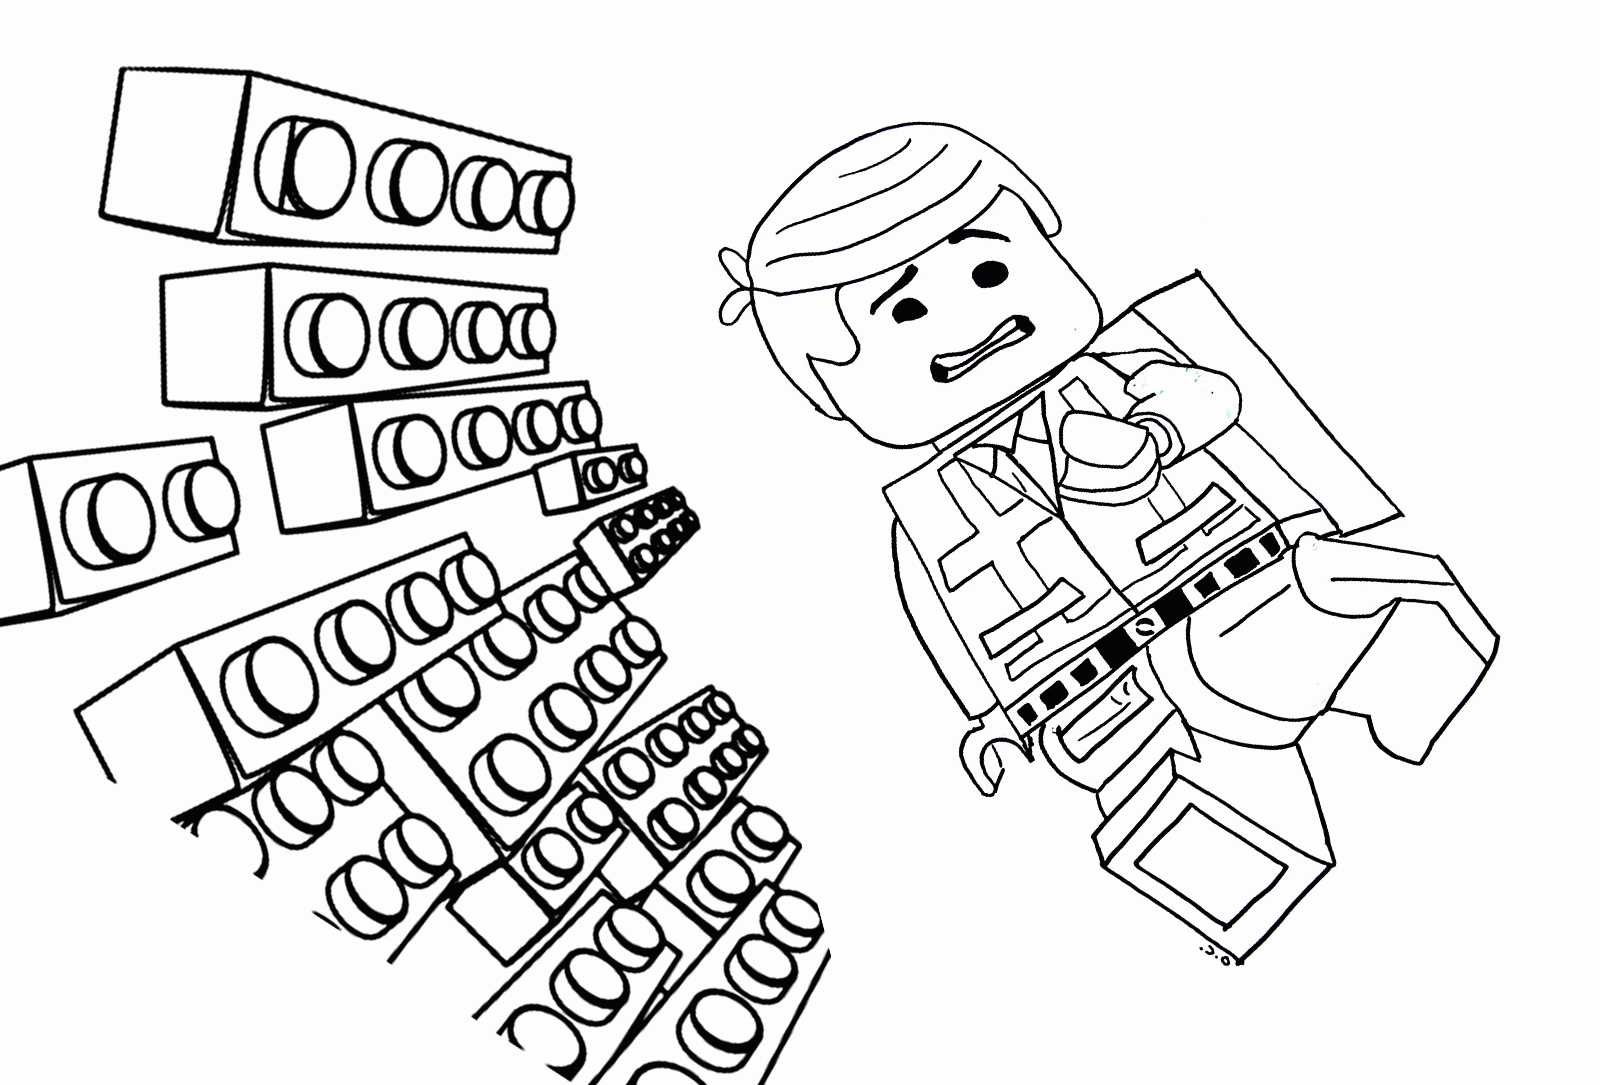 Lego Brick Coloring Page - High Quality Coloring Pages